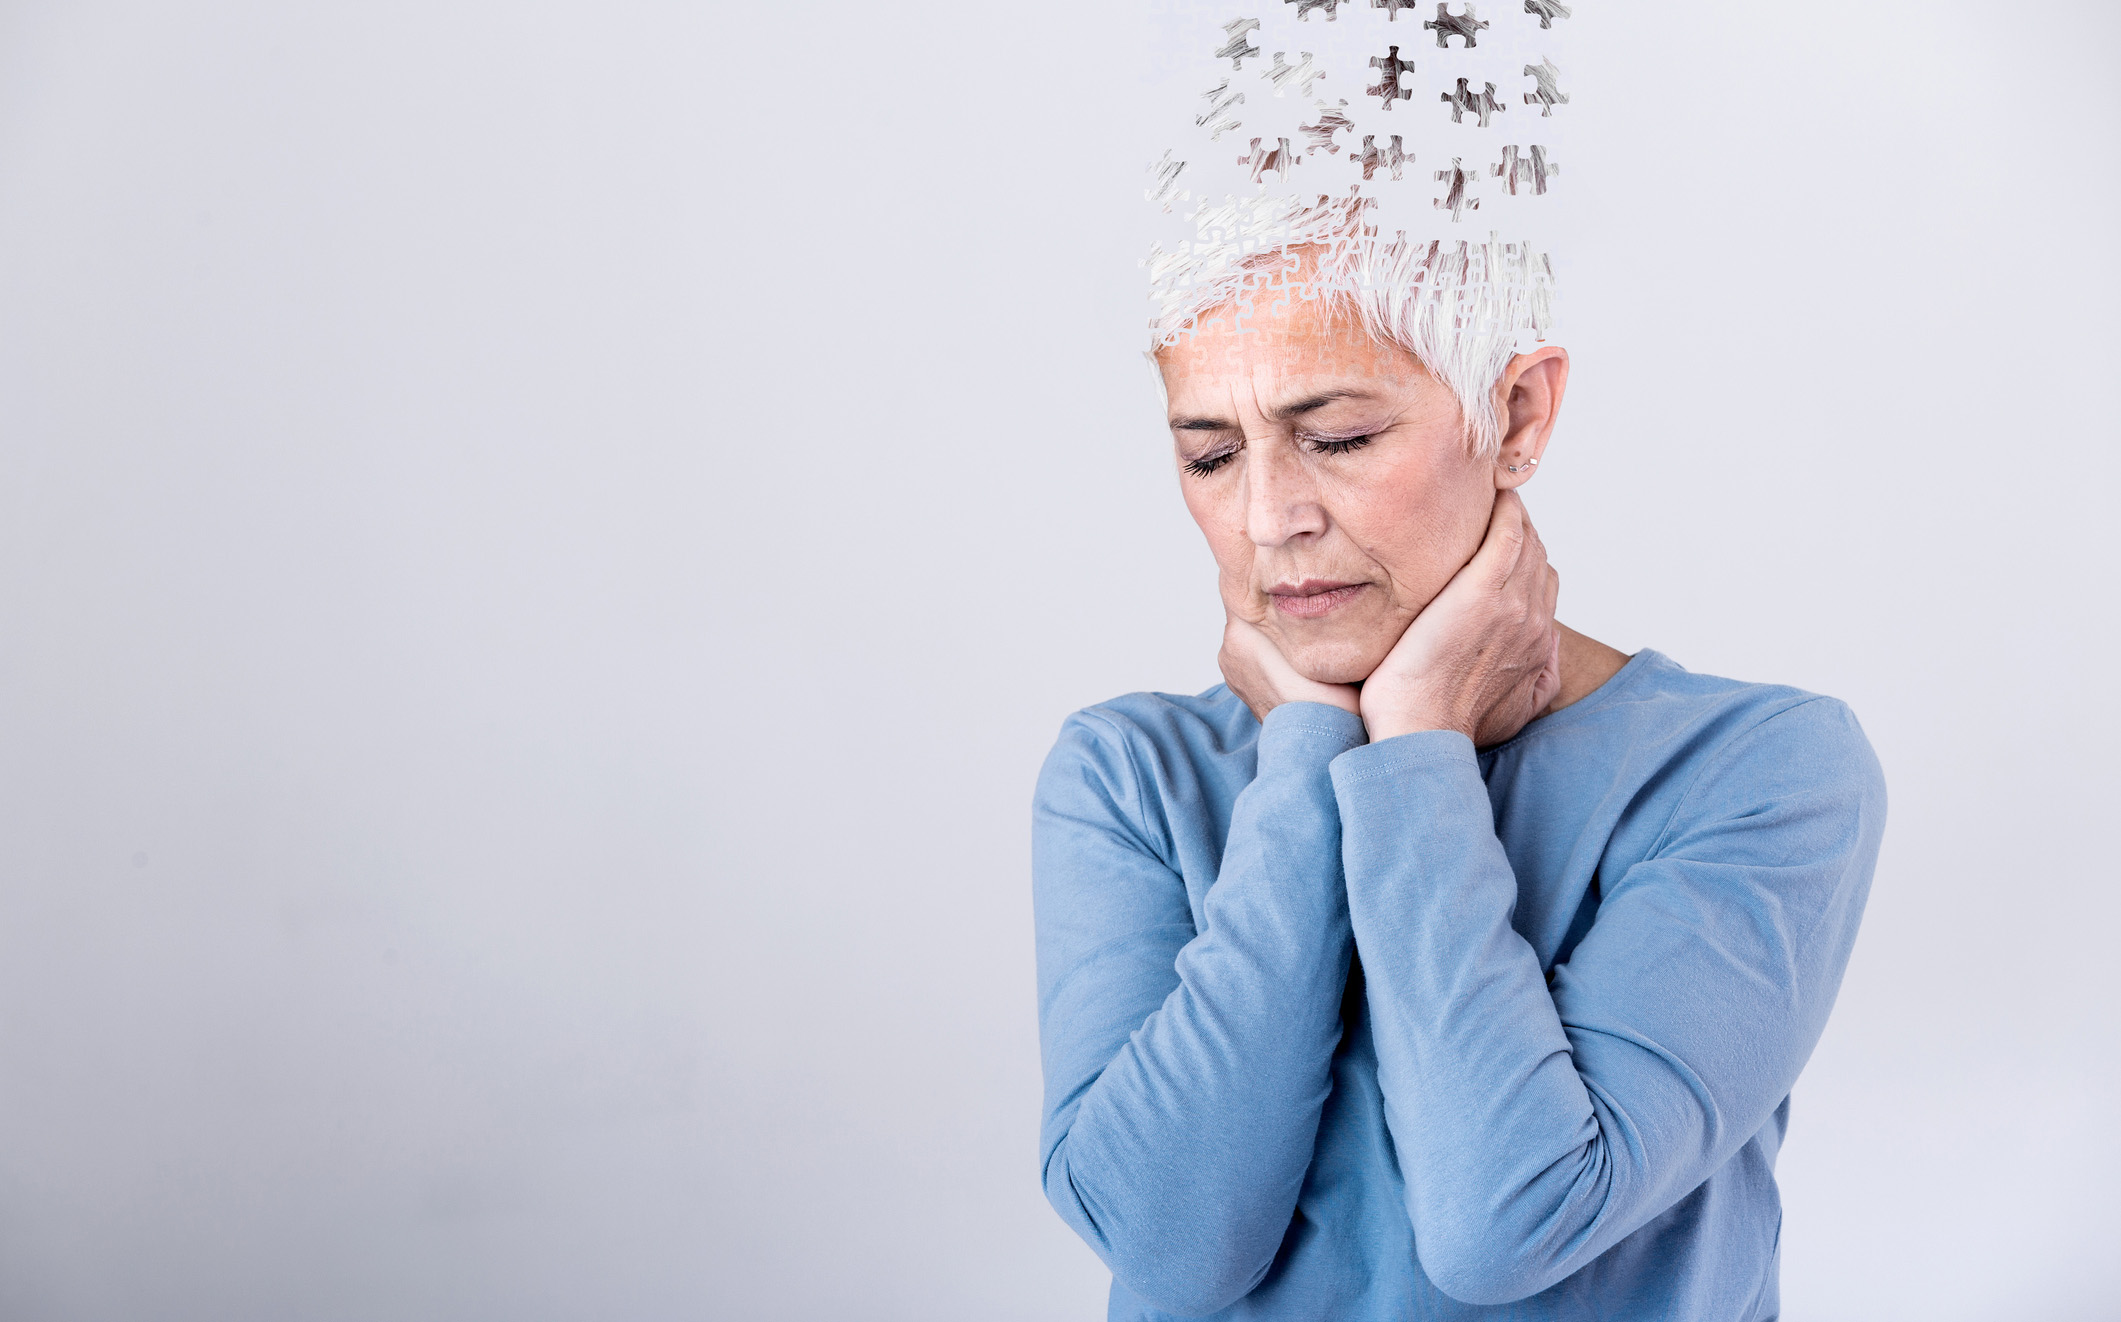 Photo of a distressed woman with short gray hair with illustration puzzle pieces flying out of the top of her head